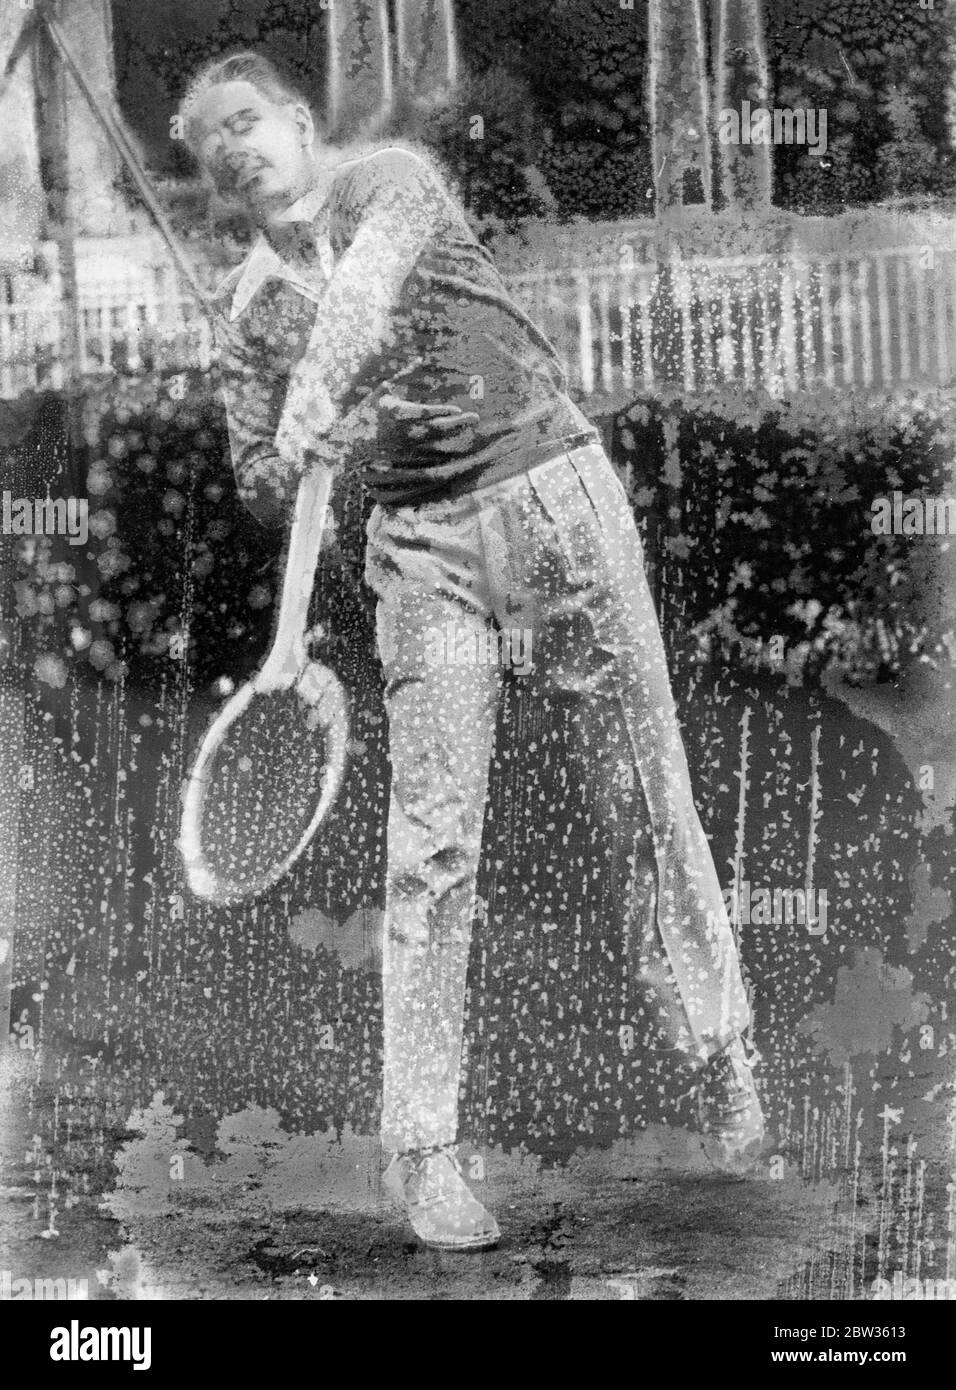 France ' s young left - handed tennis hope . 16 May 1933 Stock Photo